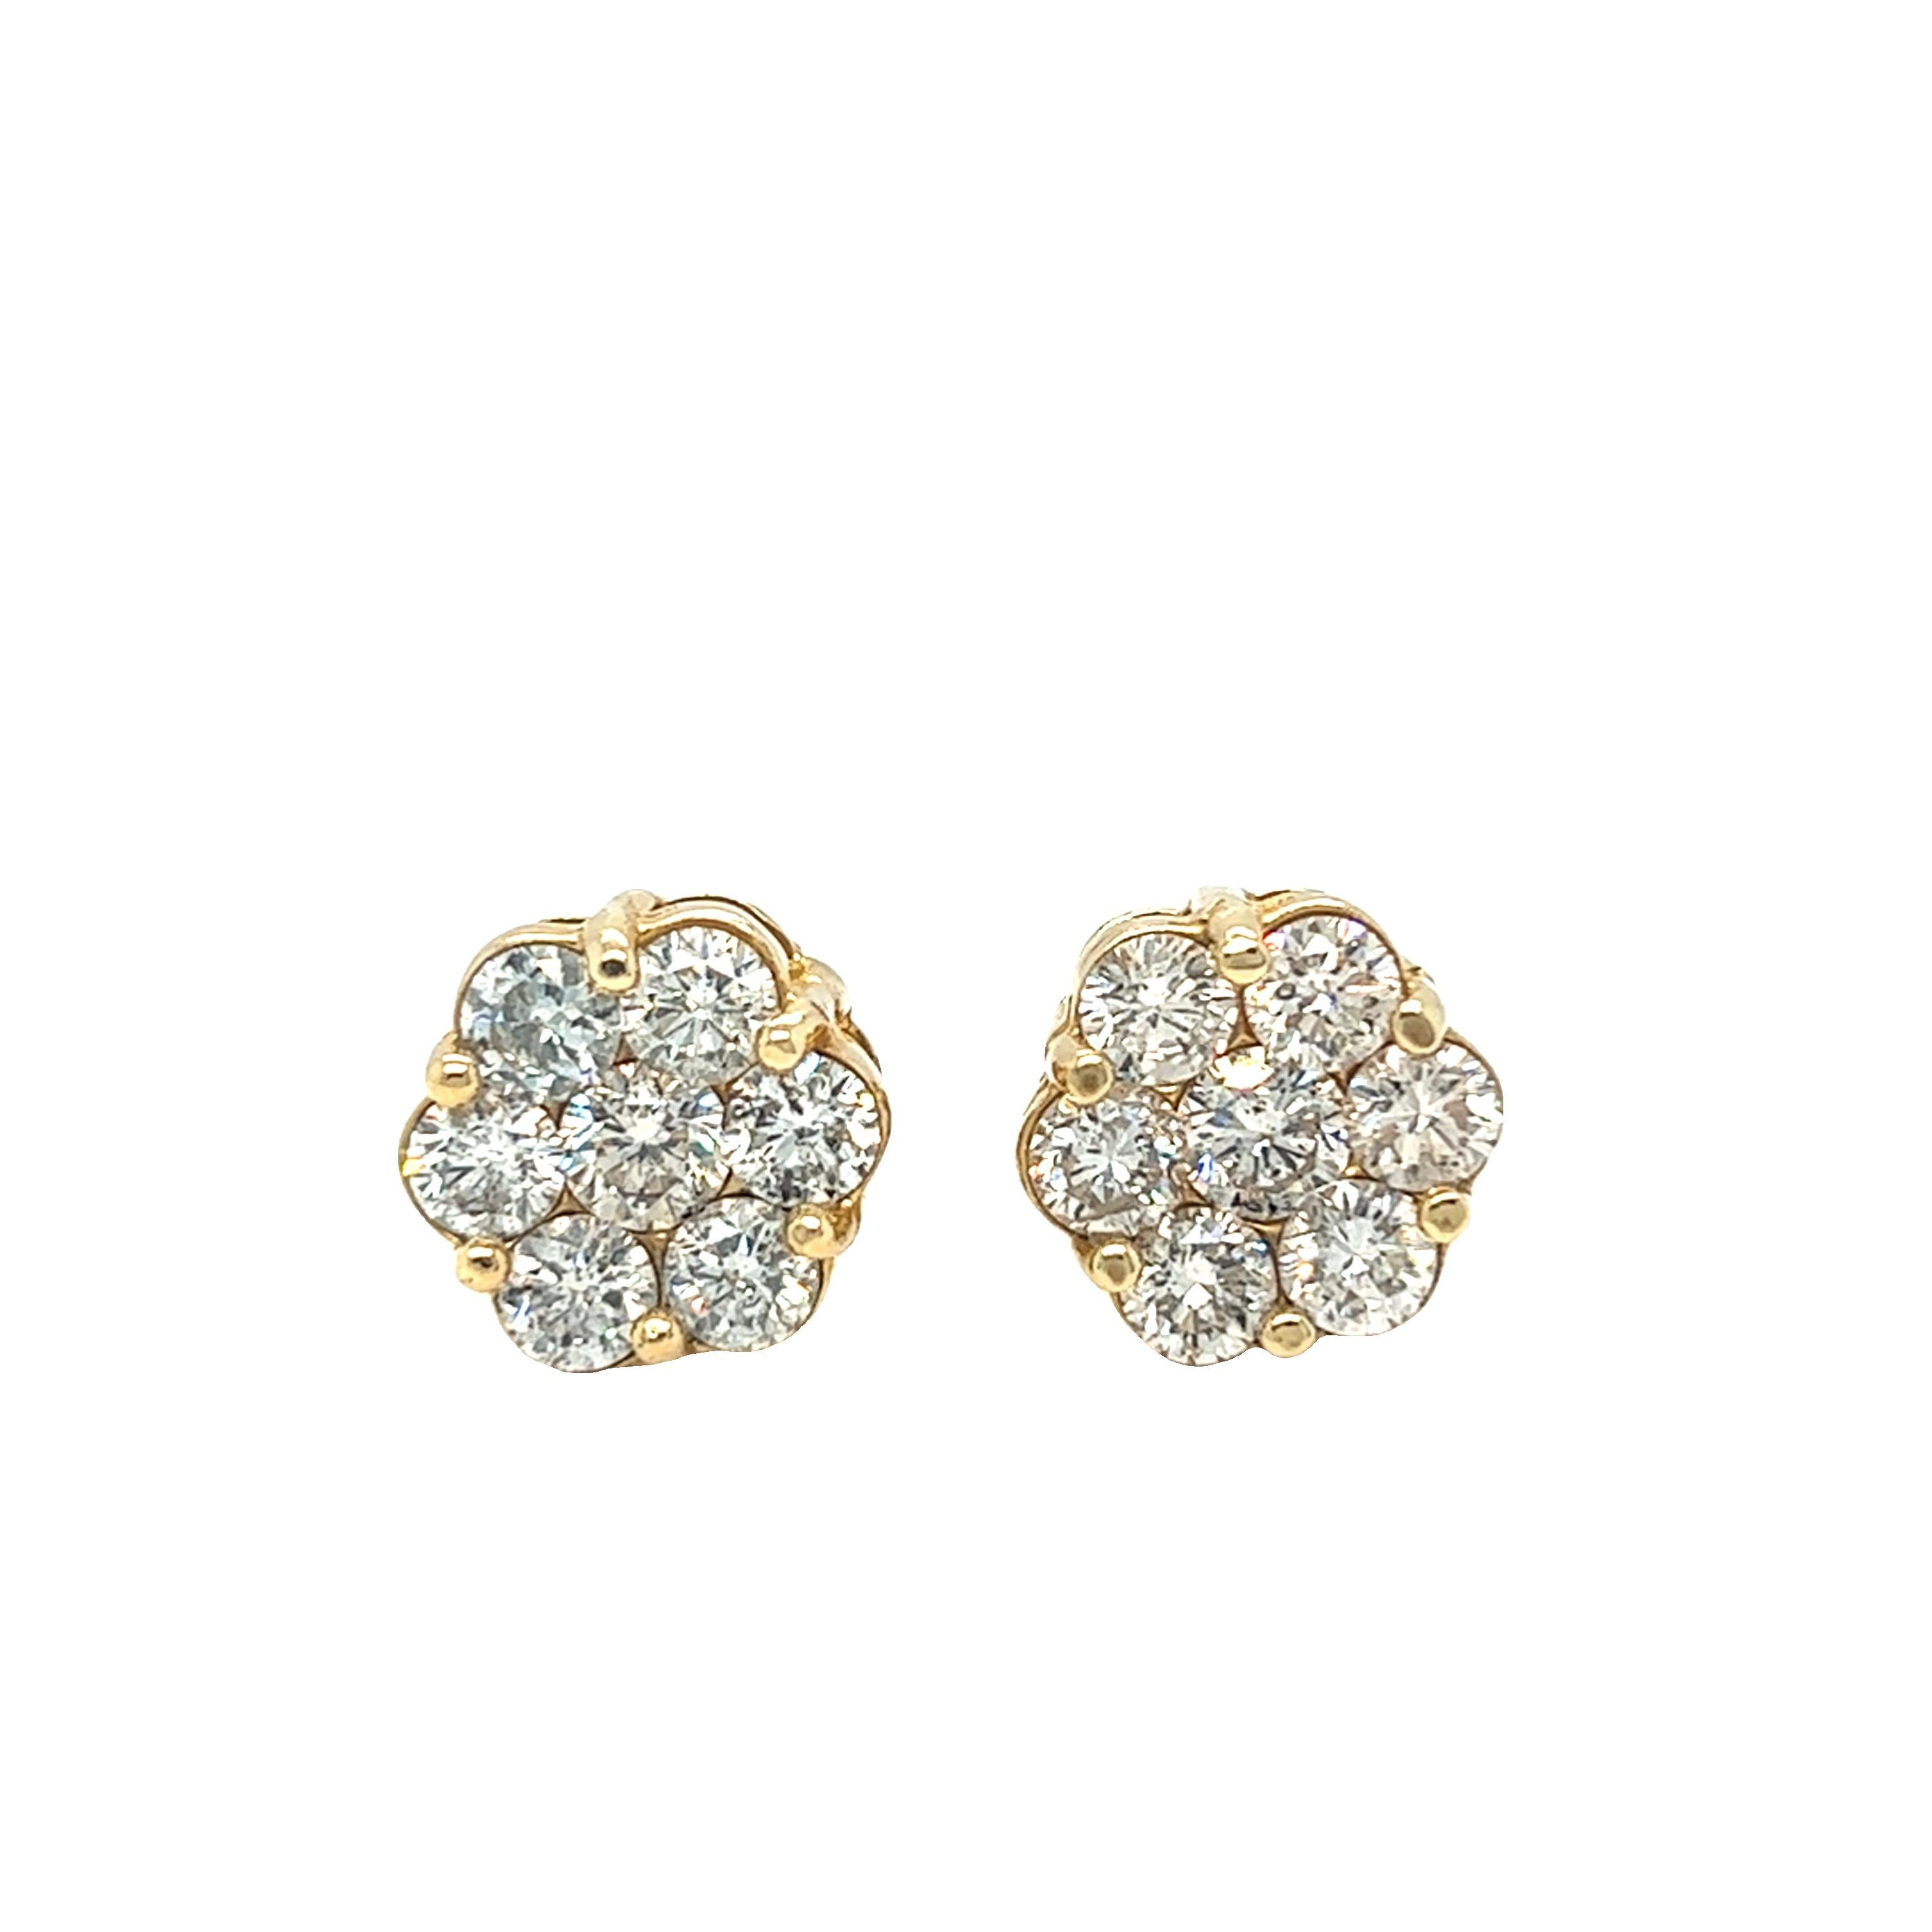 Fun and beautiful earrings for daily wear or a night out. Keep it simple and elegant. These vintage blossom flower stud earrings make a sparkling and bold statement.  Each earring features seven round brilliant cut diamonds, about 0.25 carat each